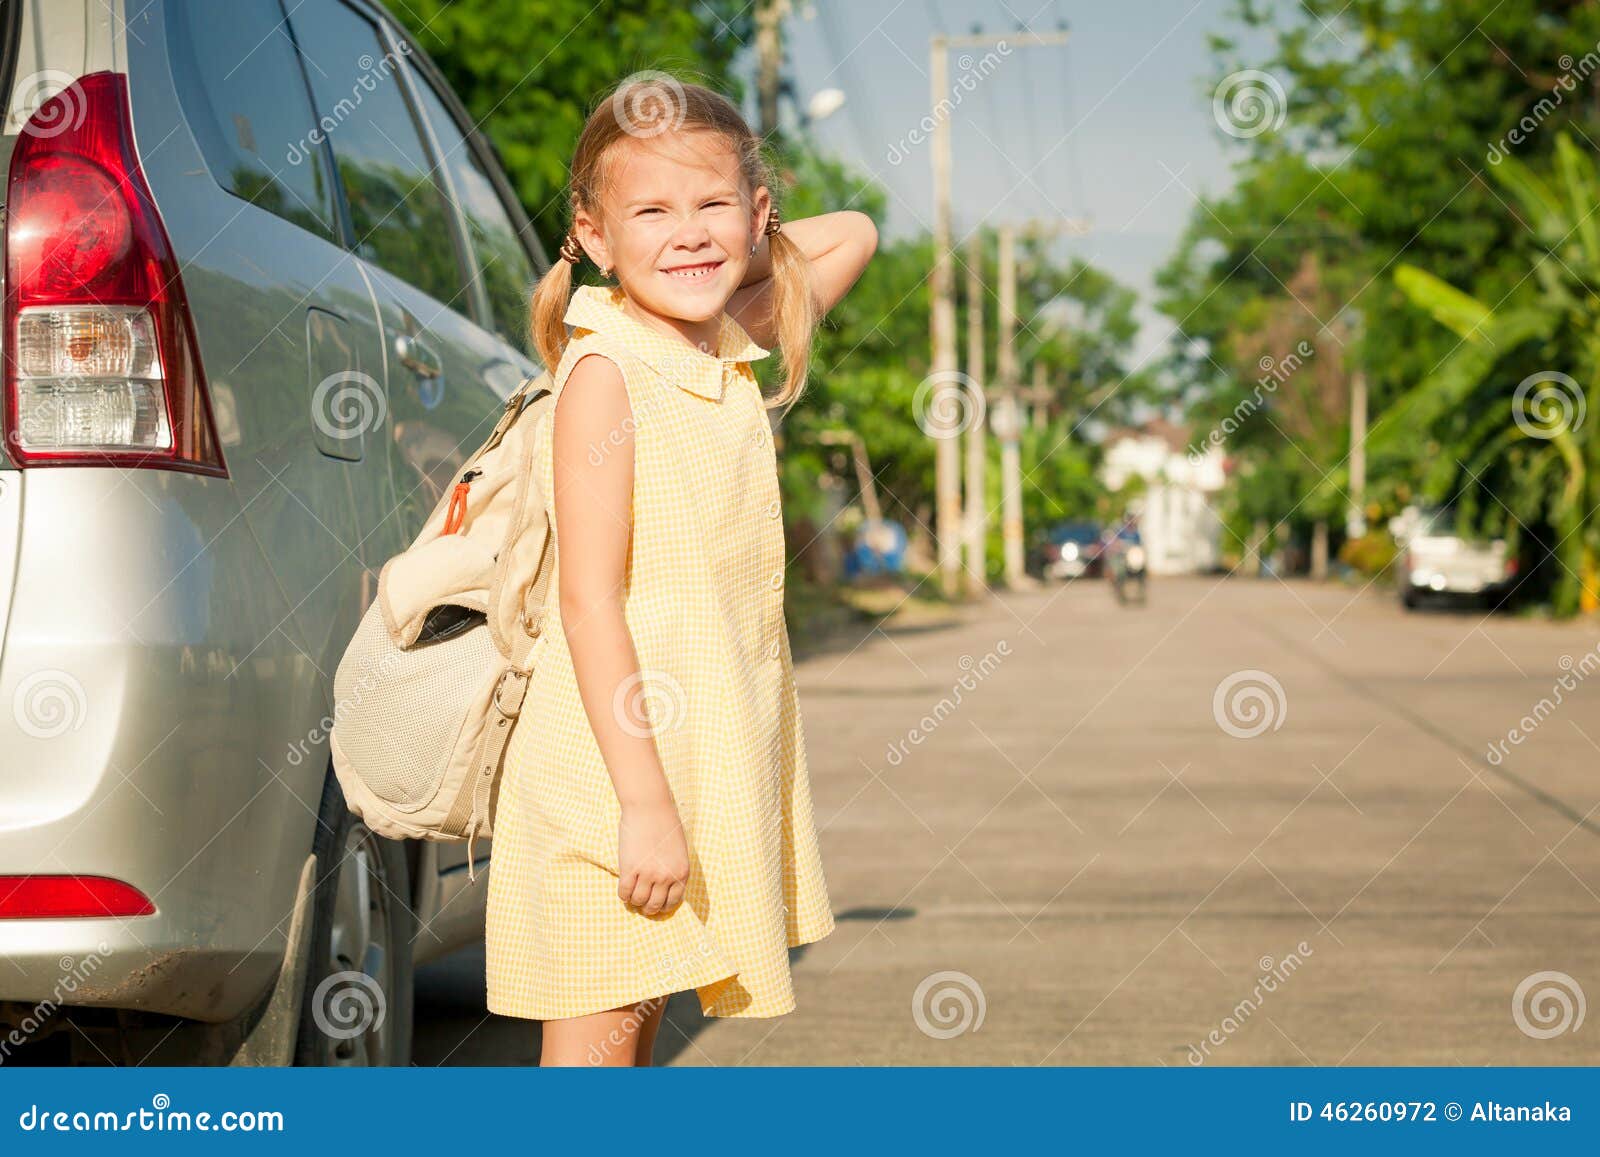 https://thumbs.dreamstime.com/z/happy-schoolgirl-standing-road-day-time-ready-to-go-to-school-46260972.jpg